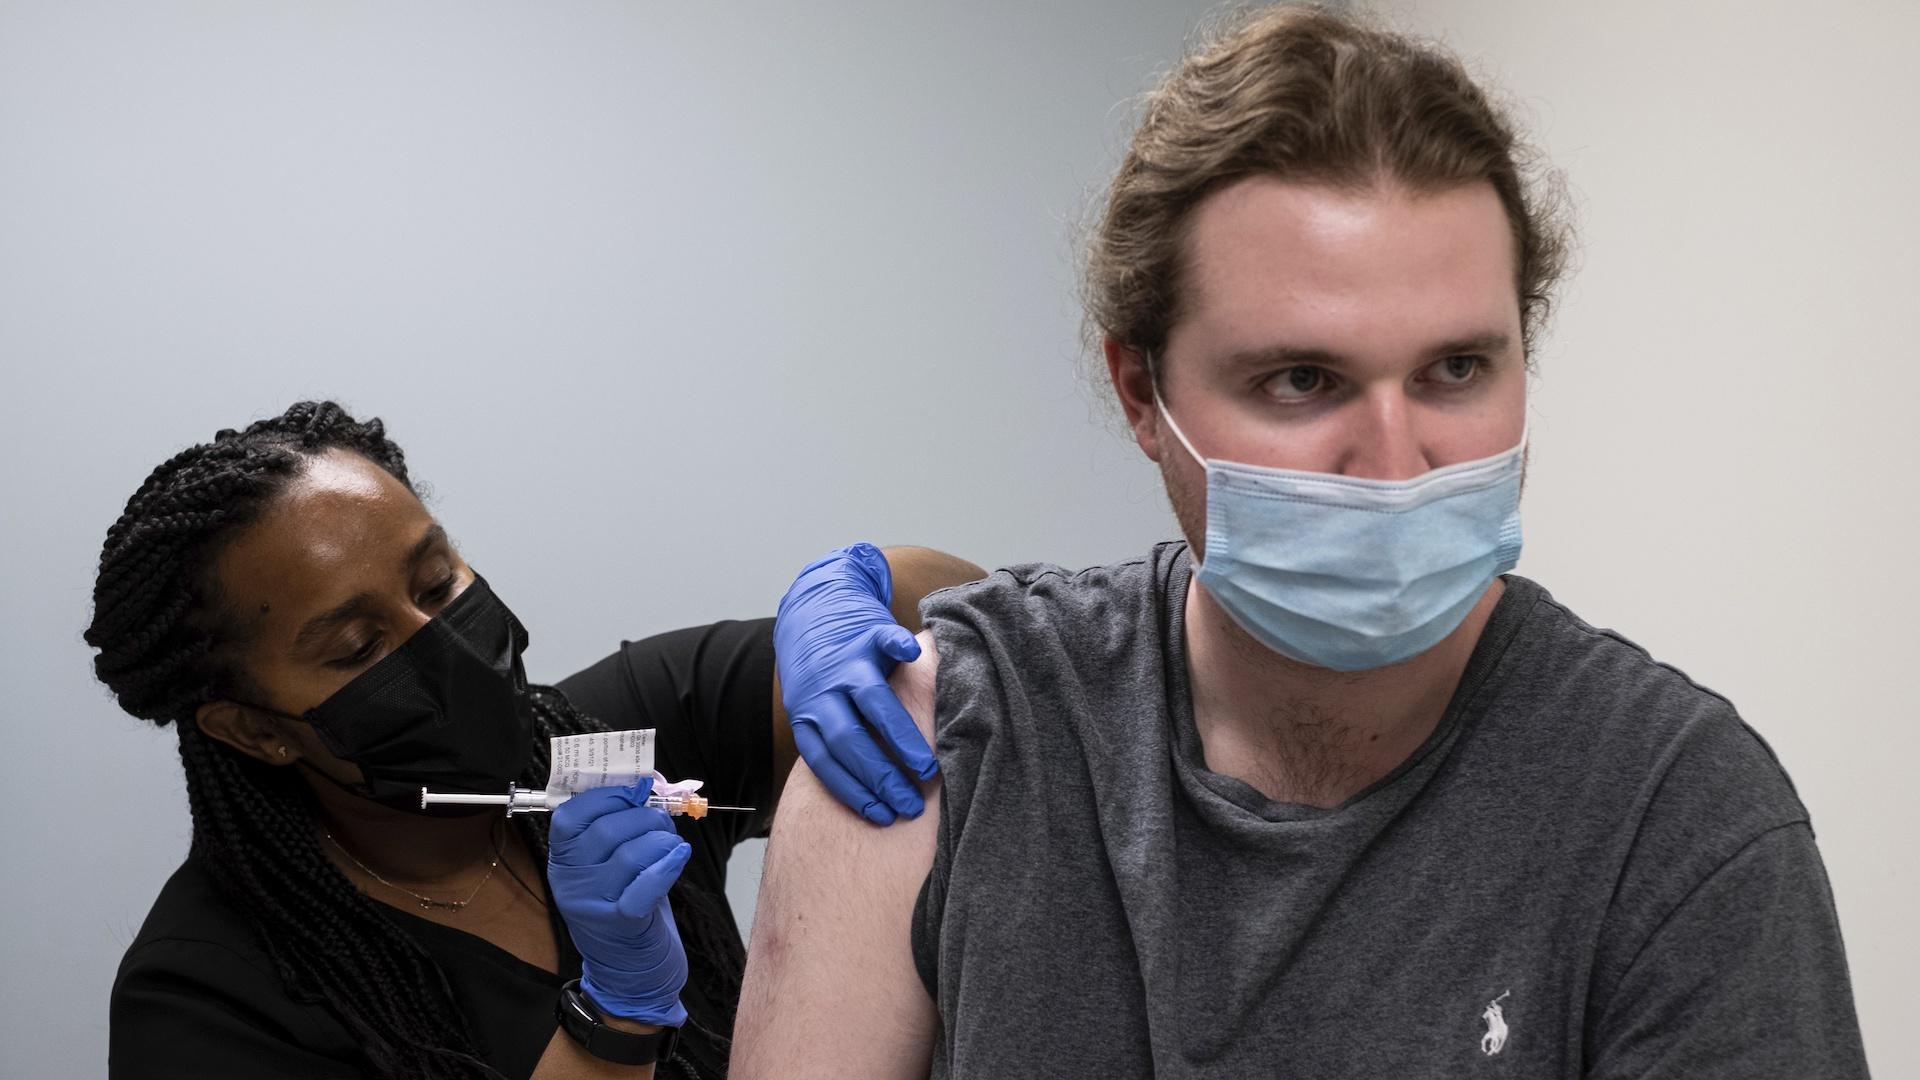 Cole Smith receives a Moderna variant vaccine shot from clinical research nurse Tigisty Girmay at Emory University's Hope Clinic, on Wednesday afternoon, March 31, 2021, in Decatur, Ga. (AP Photo / Ben Gray)